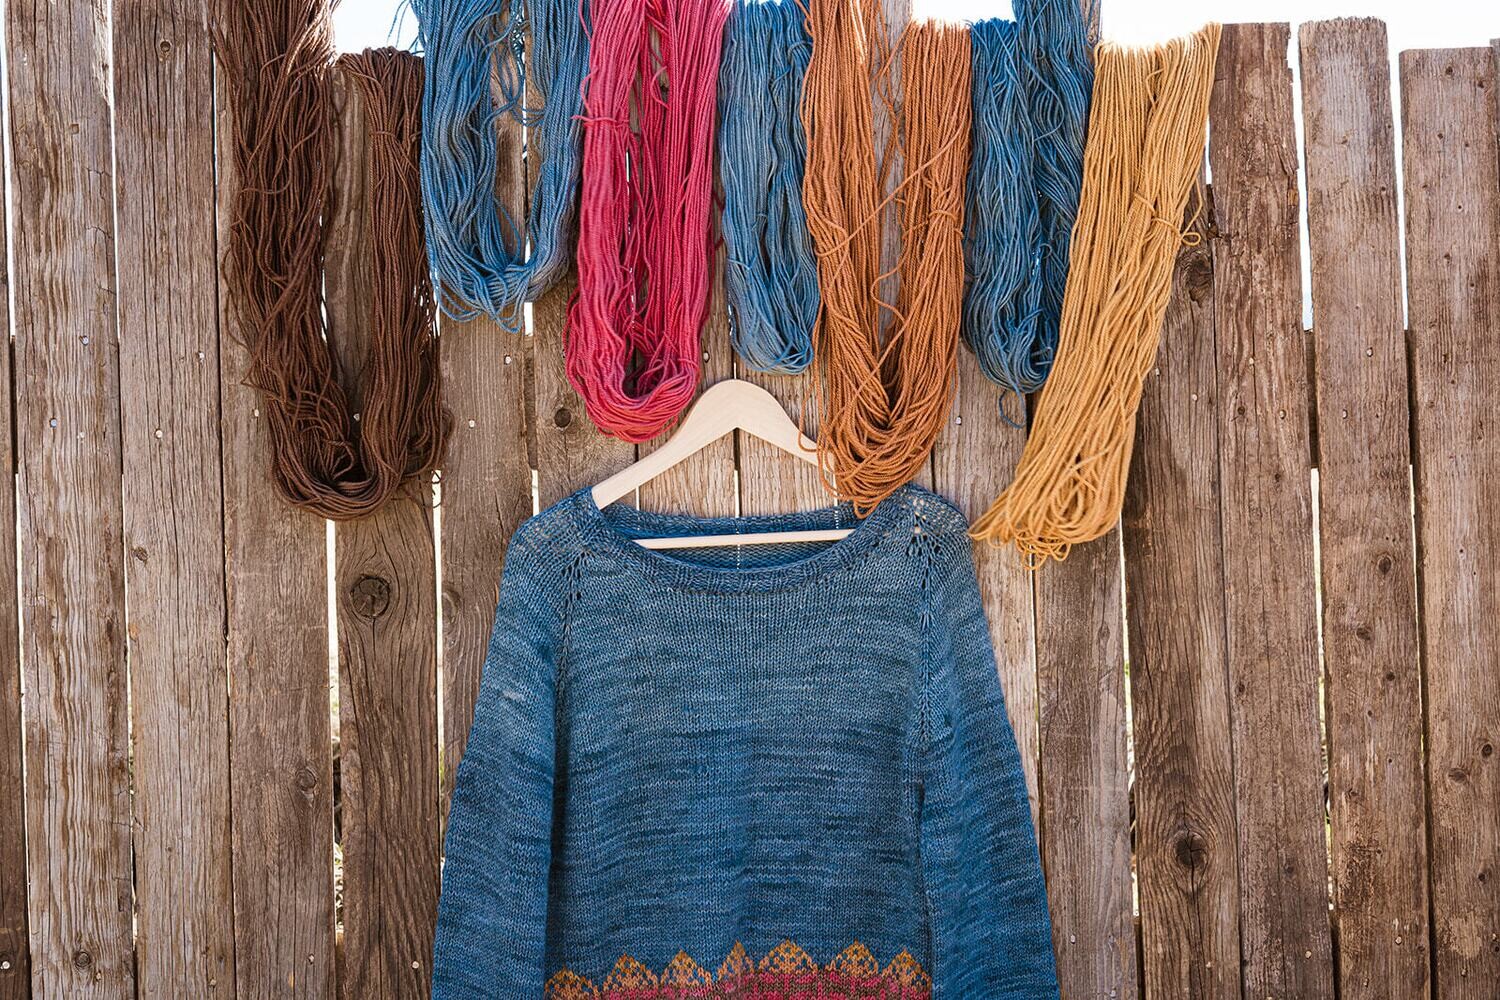 Copper Leaf Tobacco Root Valley Yarn Kit